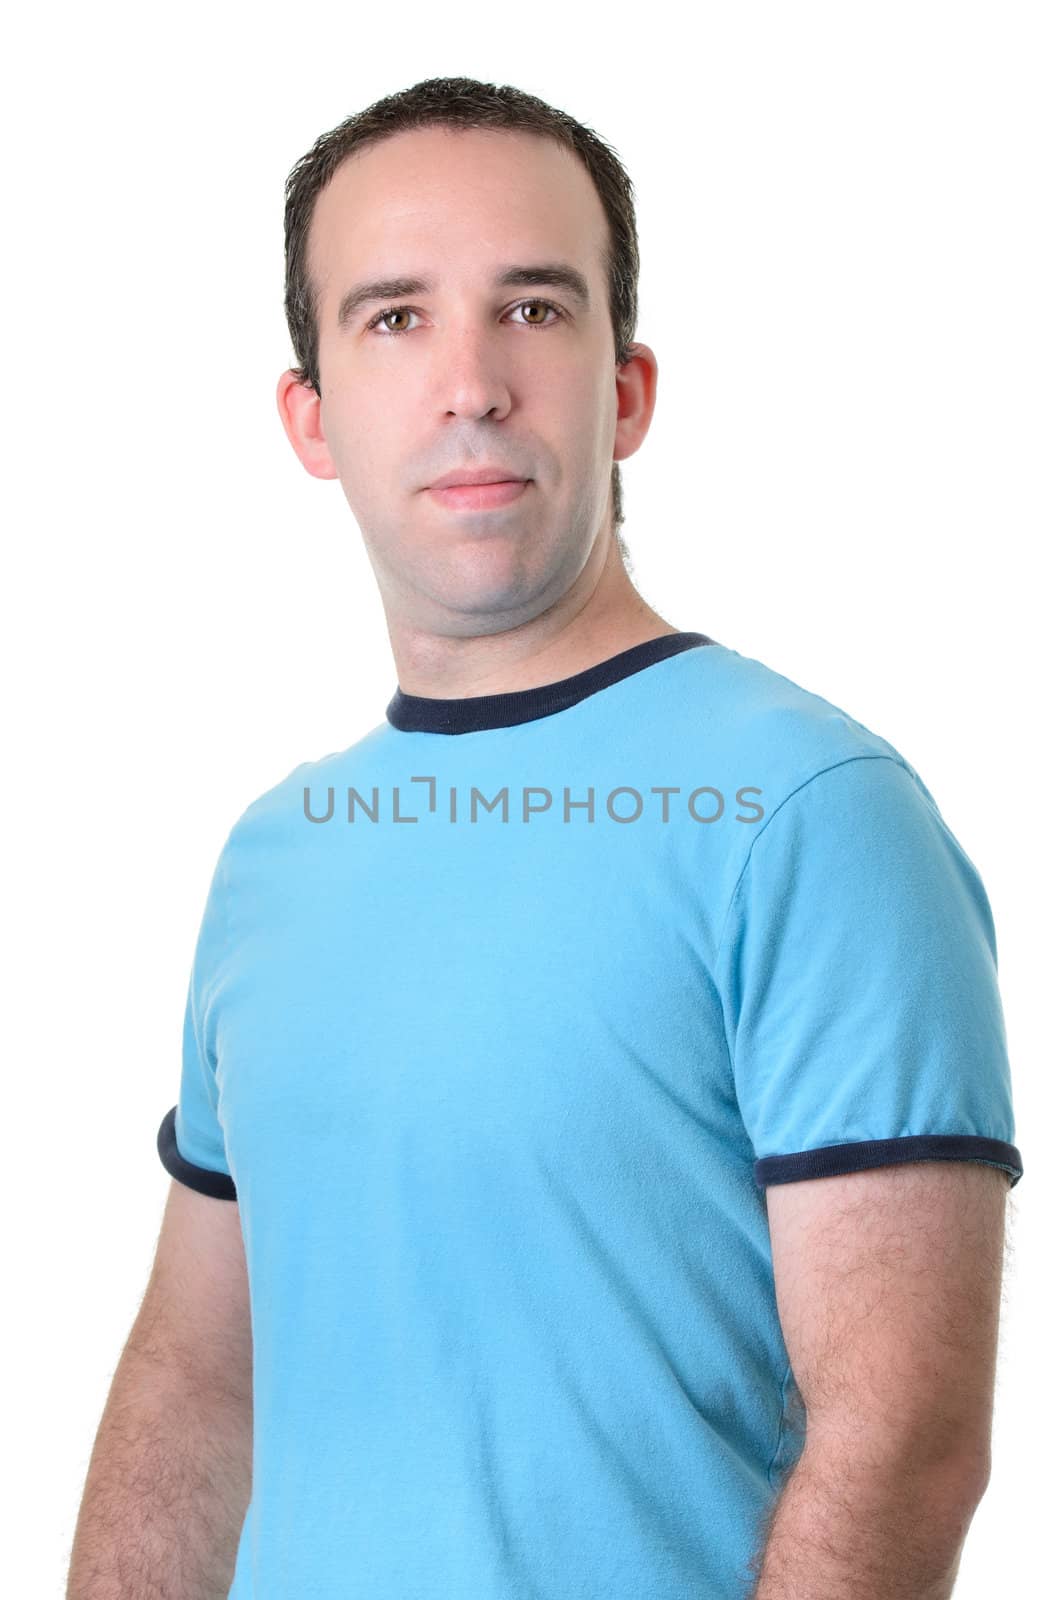 Half body shot of an average guy wearing a blue shirt, isolated against a white background.